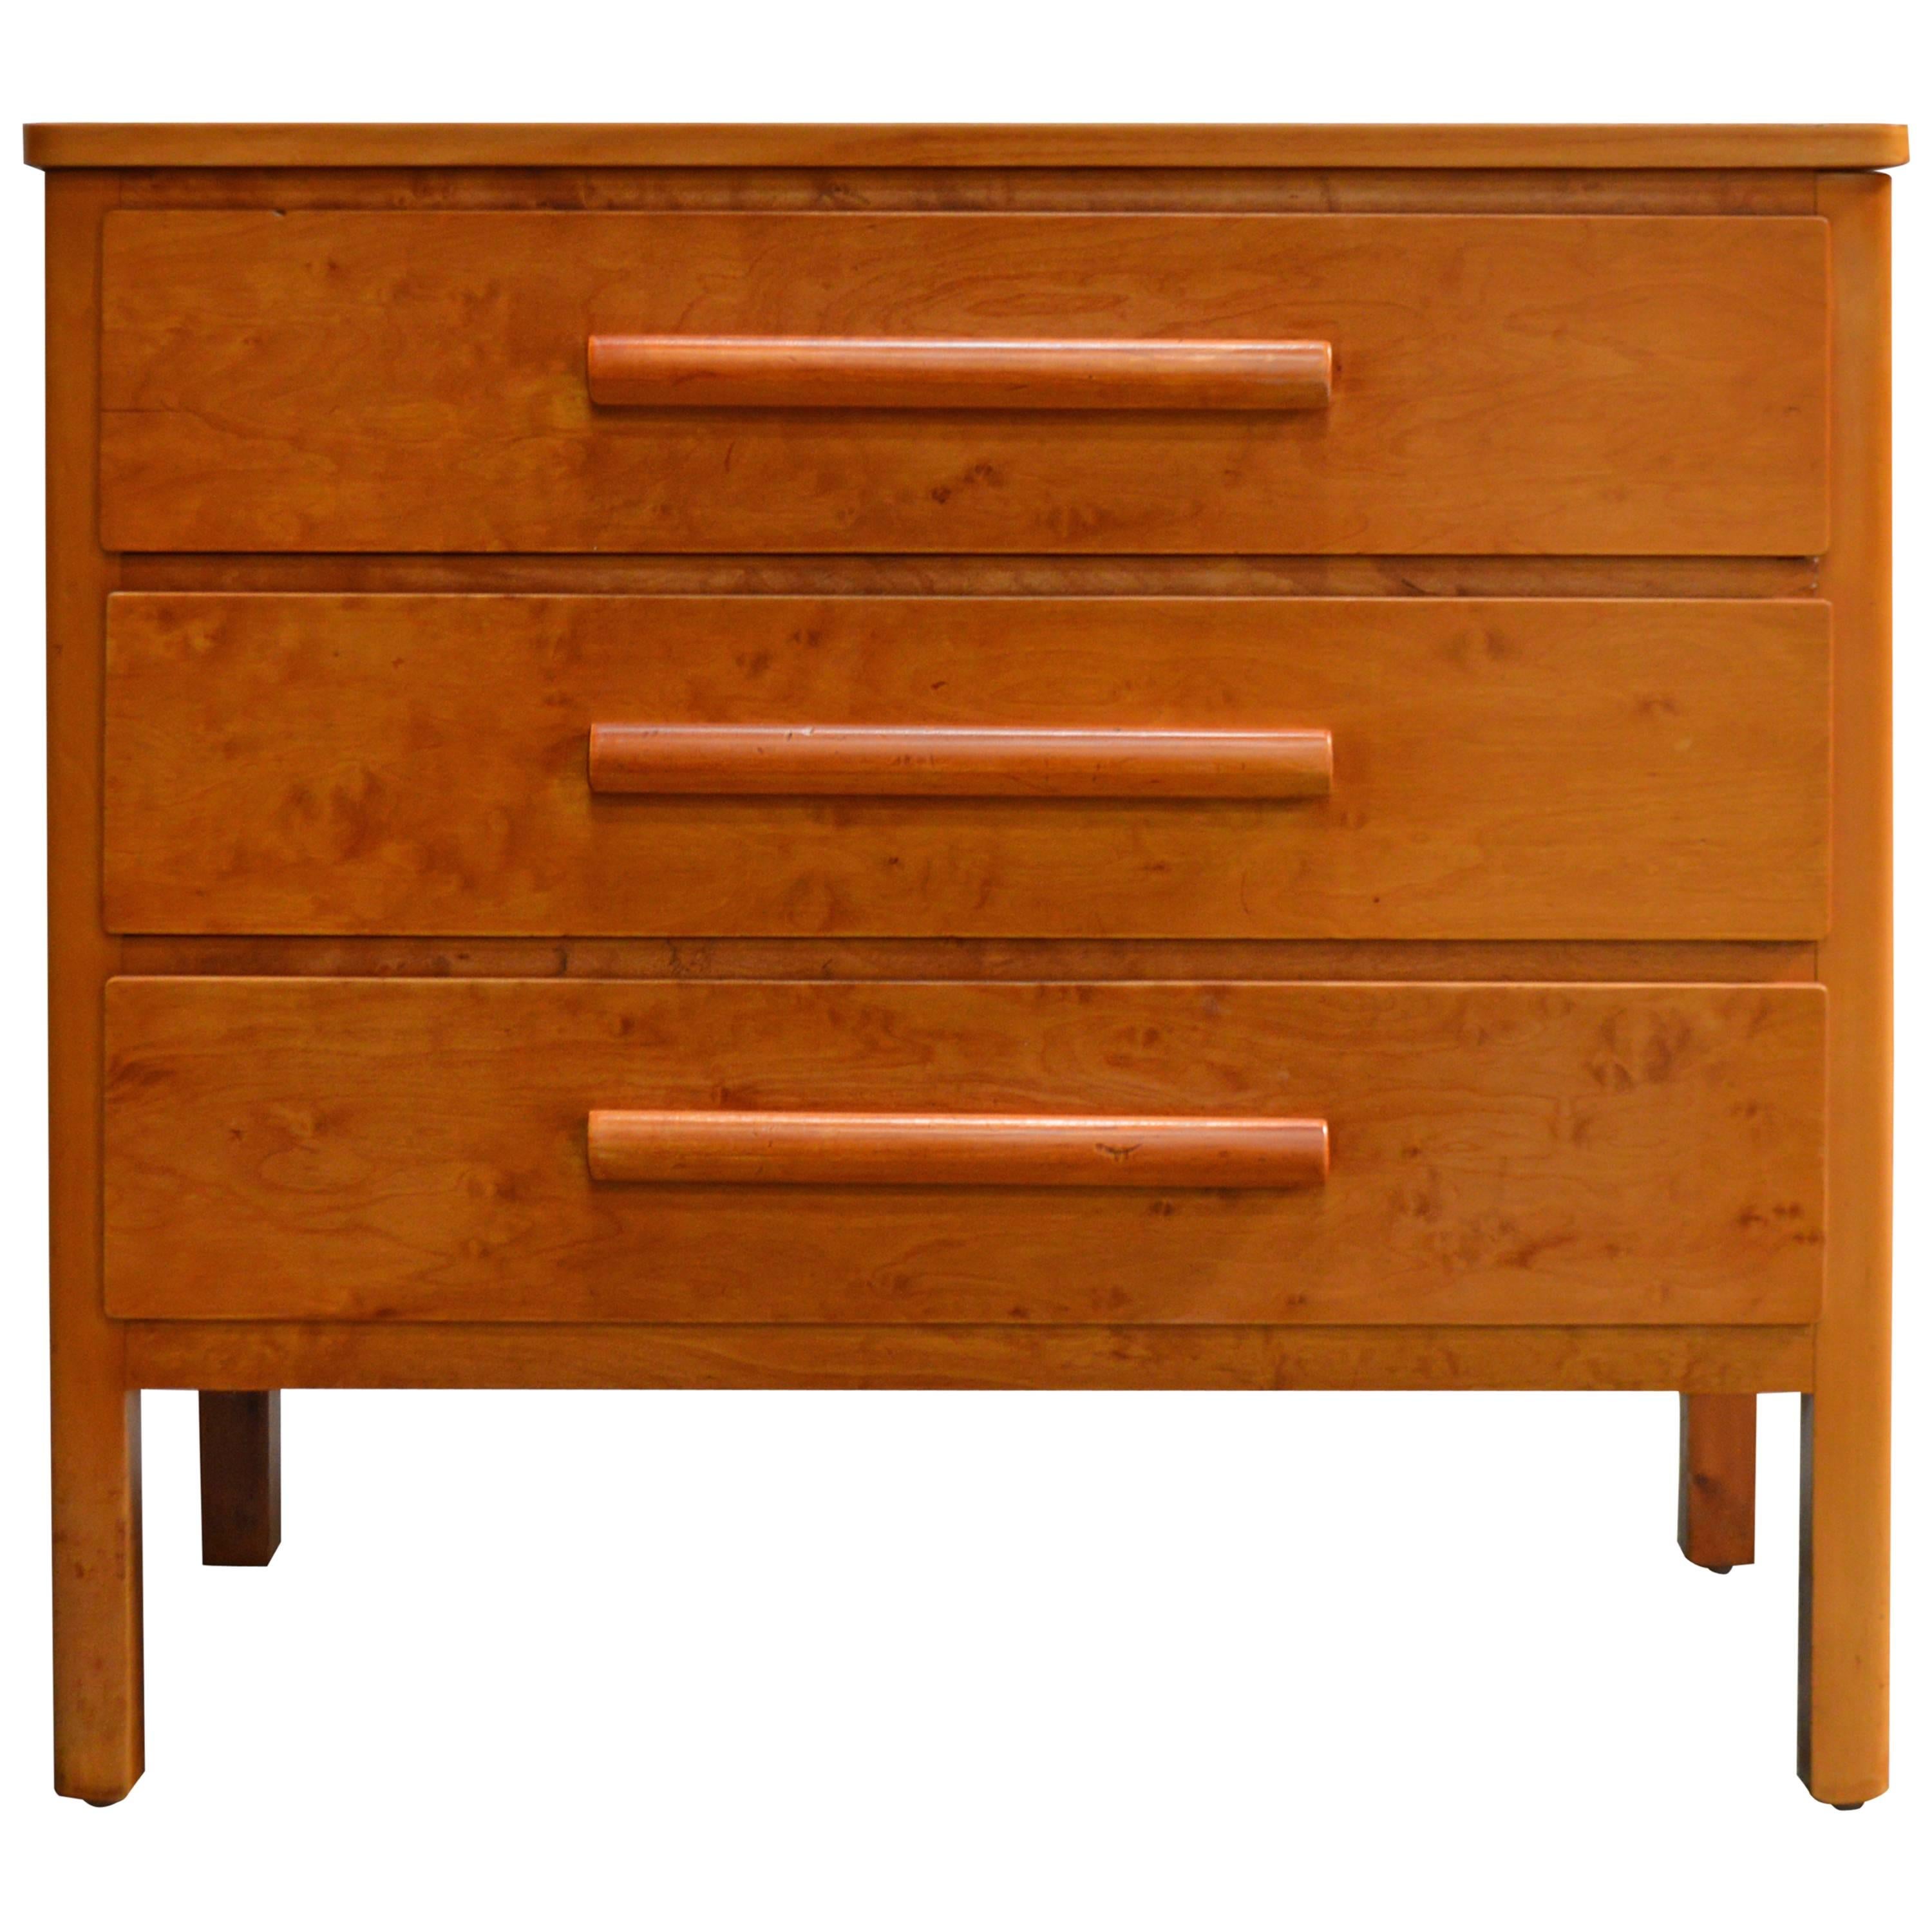 Swedish Art Deco Moderne Three-Drawer Chest or Commode